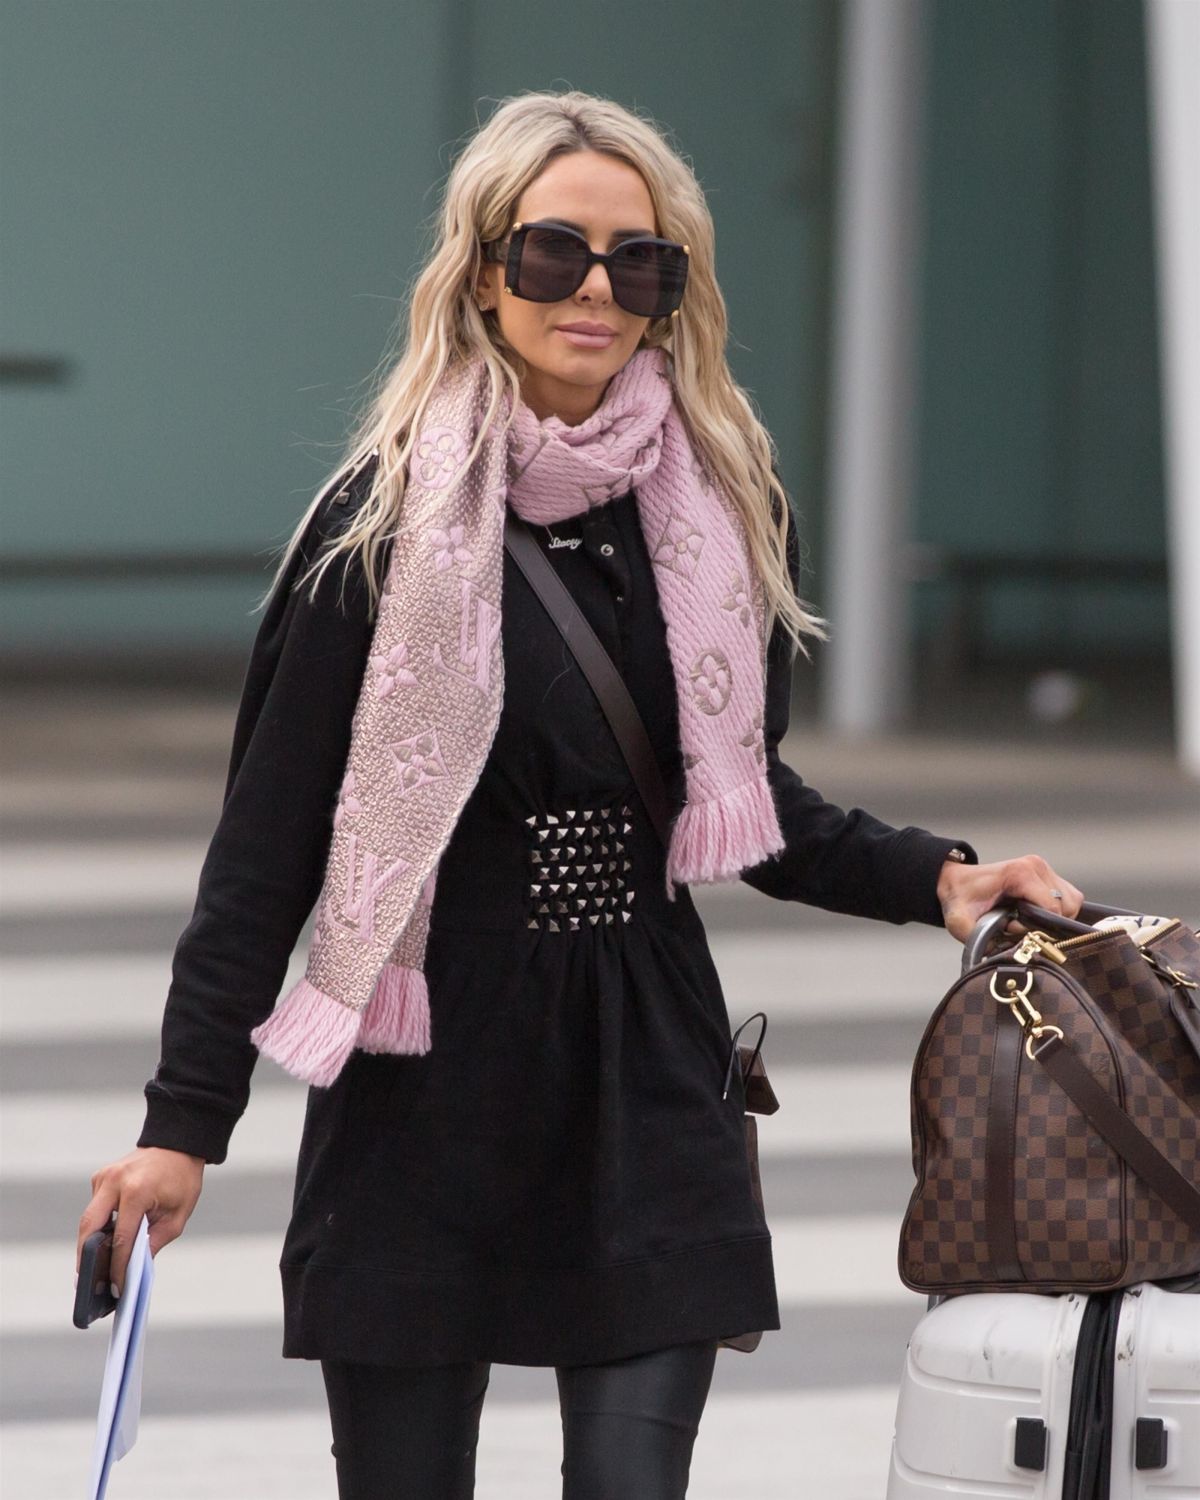 Stacey Hampton Out with Luggage in Melbourne 2020/05/31